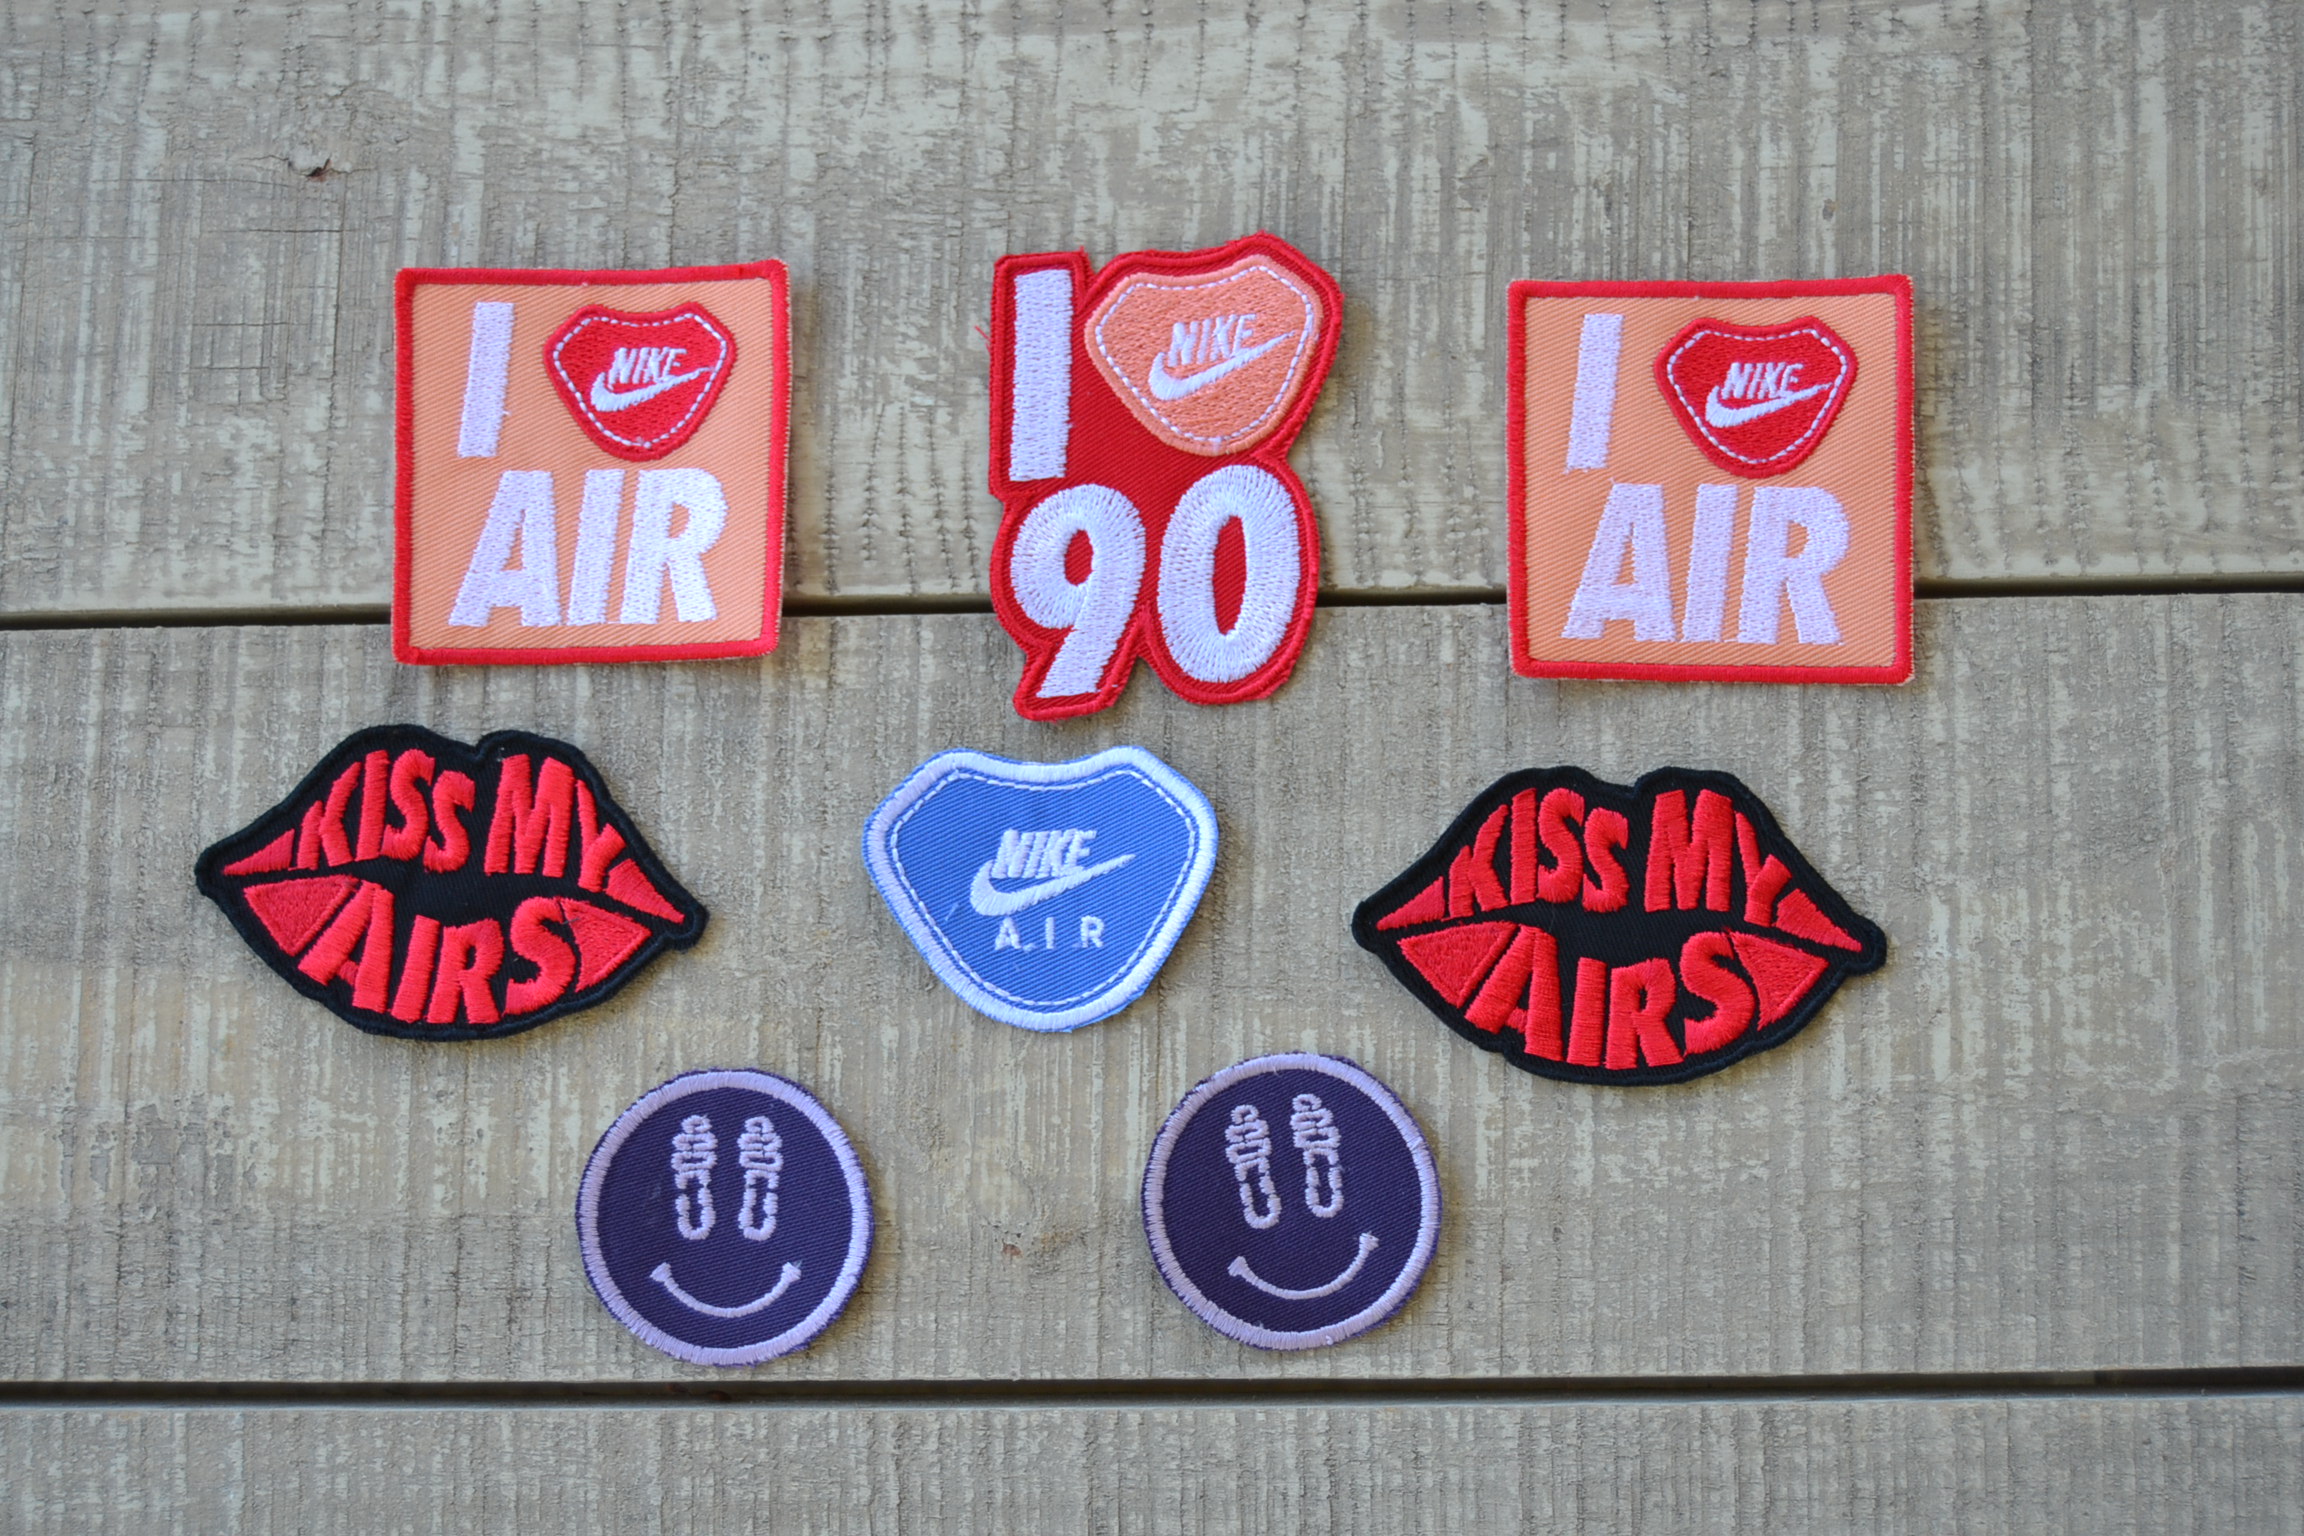 Nike adhesive embroidered patches, clothing accessories